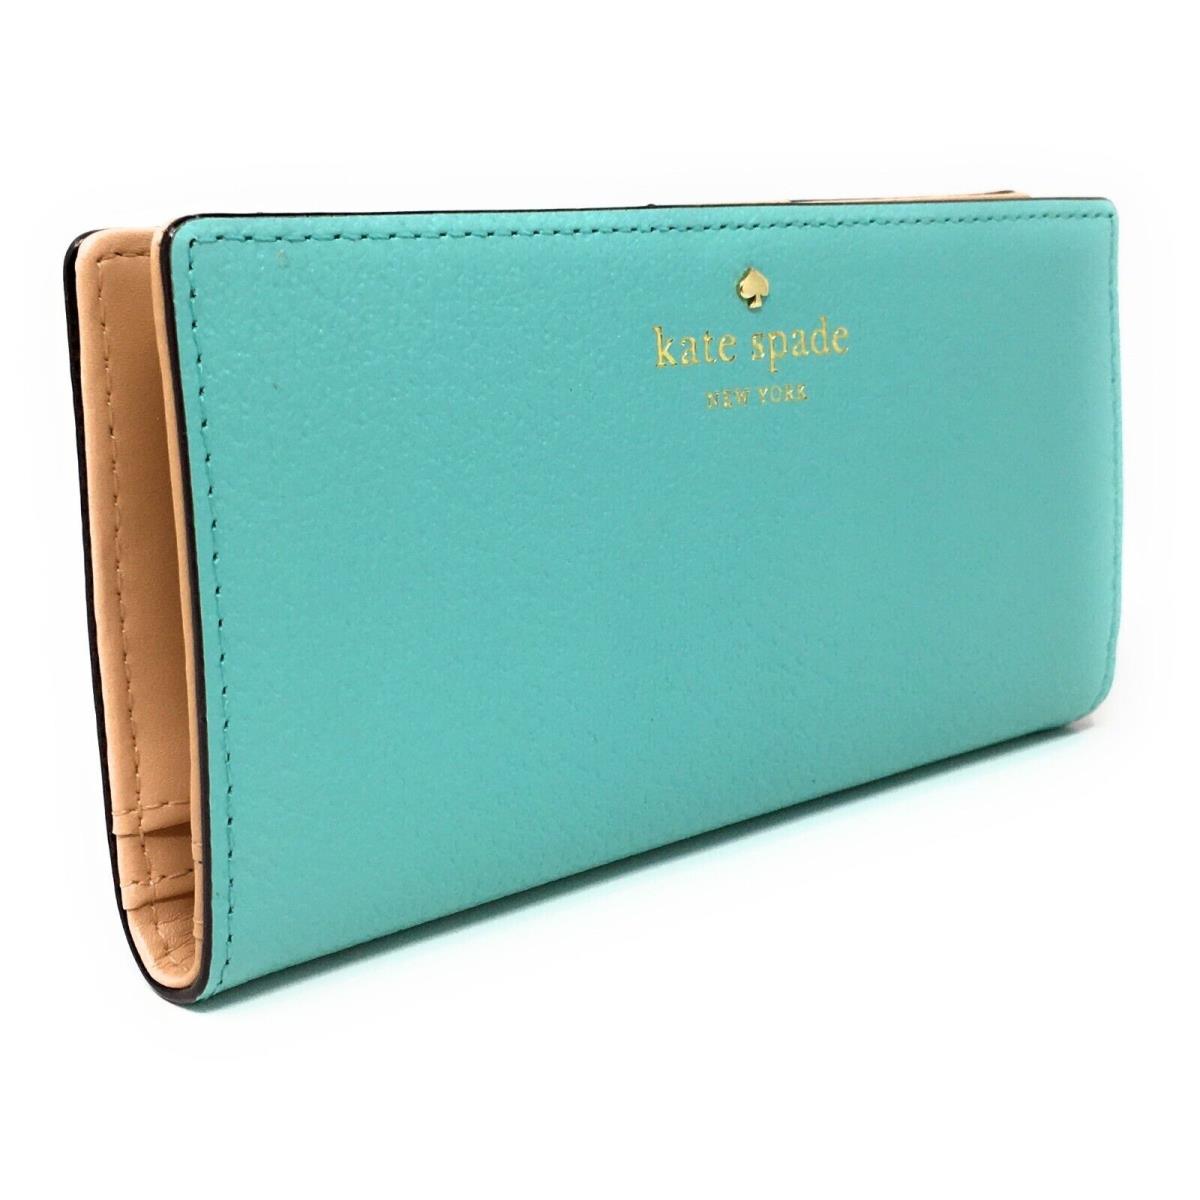 Kate Spade New York Grand Street Stacy Leather Wallet in Soft Aqua: